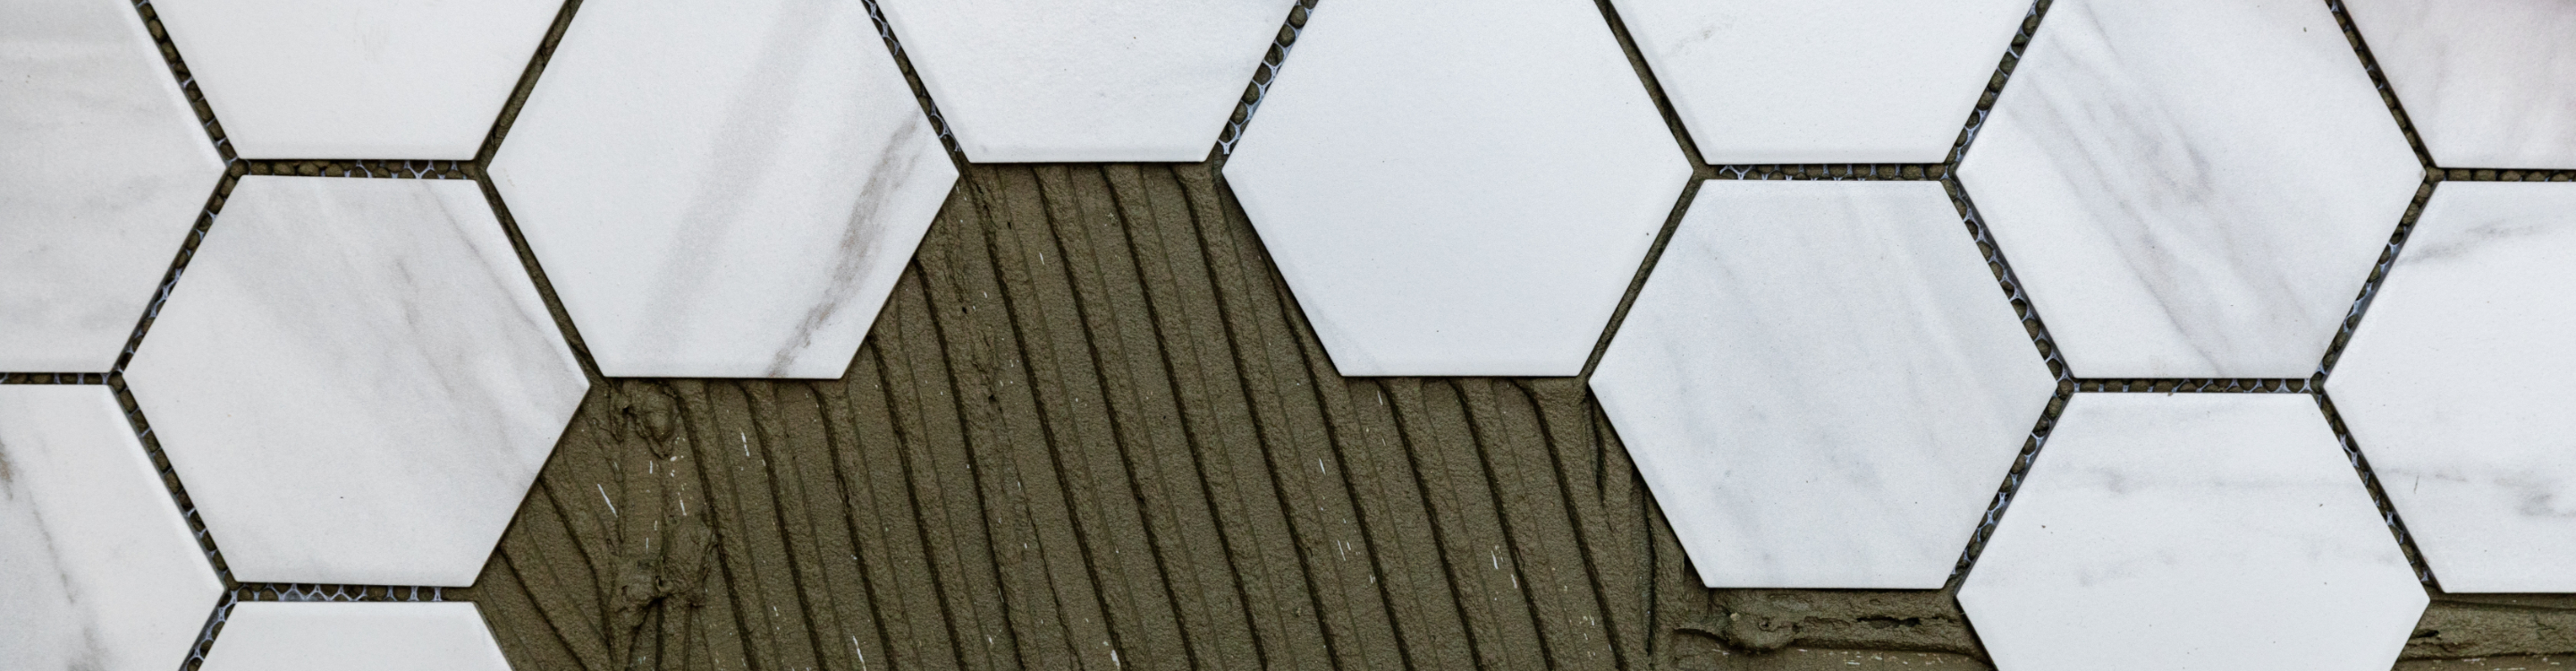 hexagon marble tiles close up during installation